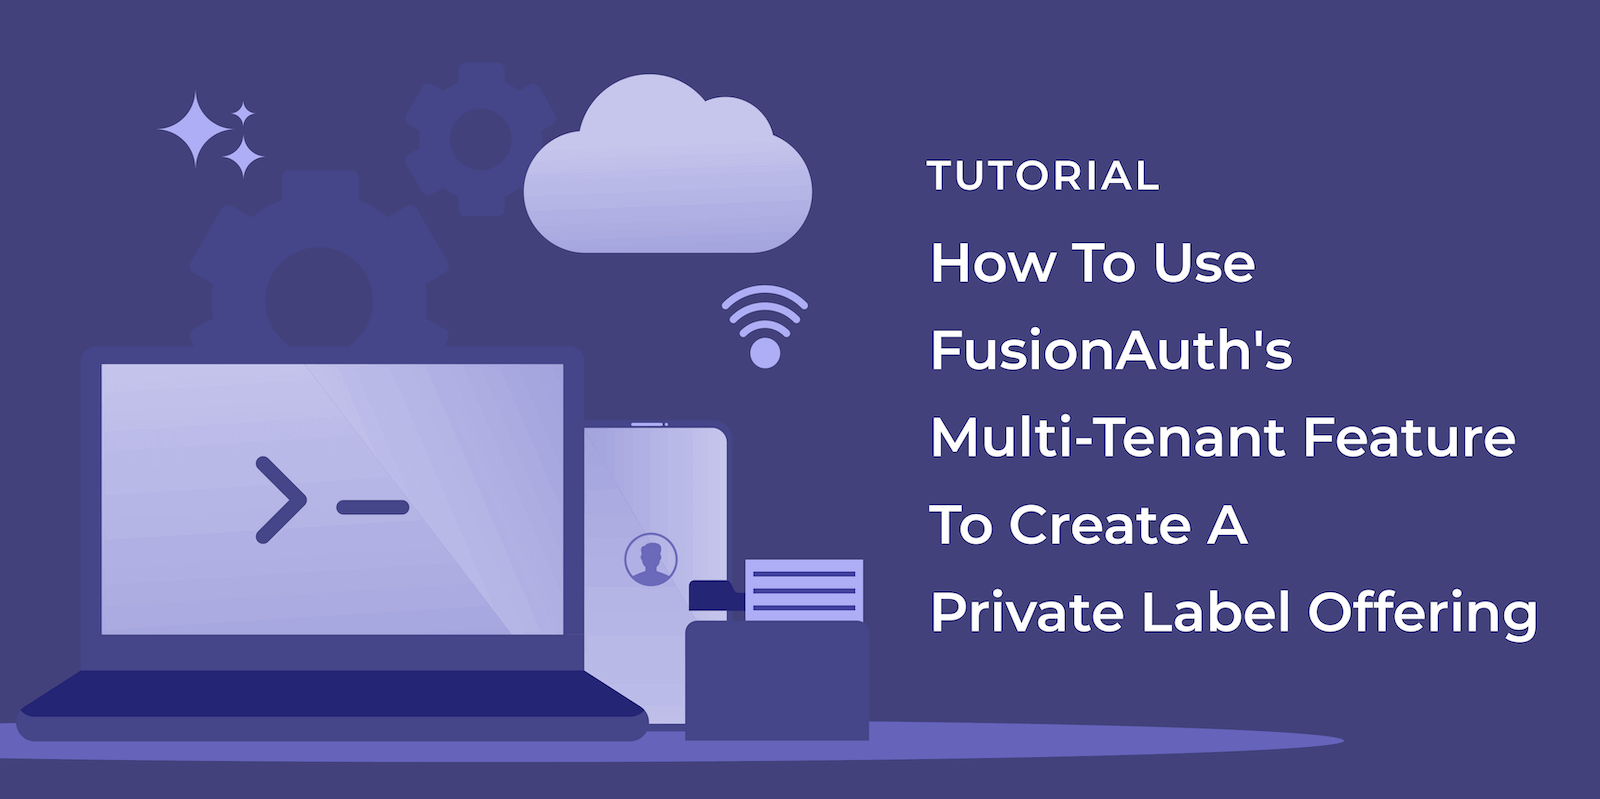 How To Use FusionAuth's Multi-Tenant Feature To Create A Private Label Offering